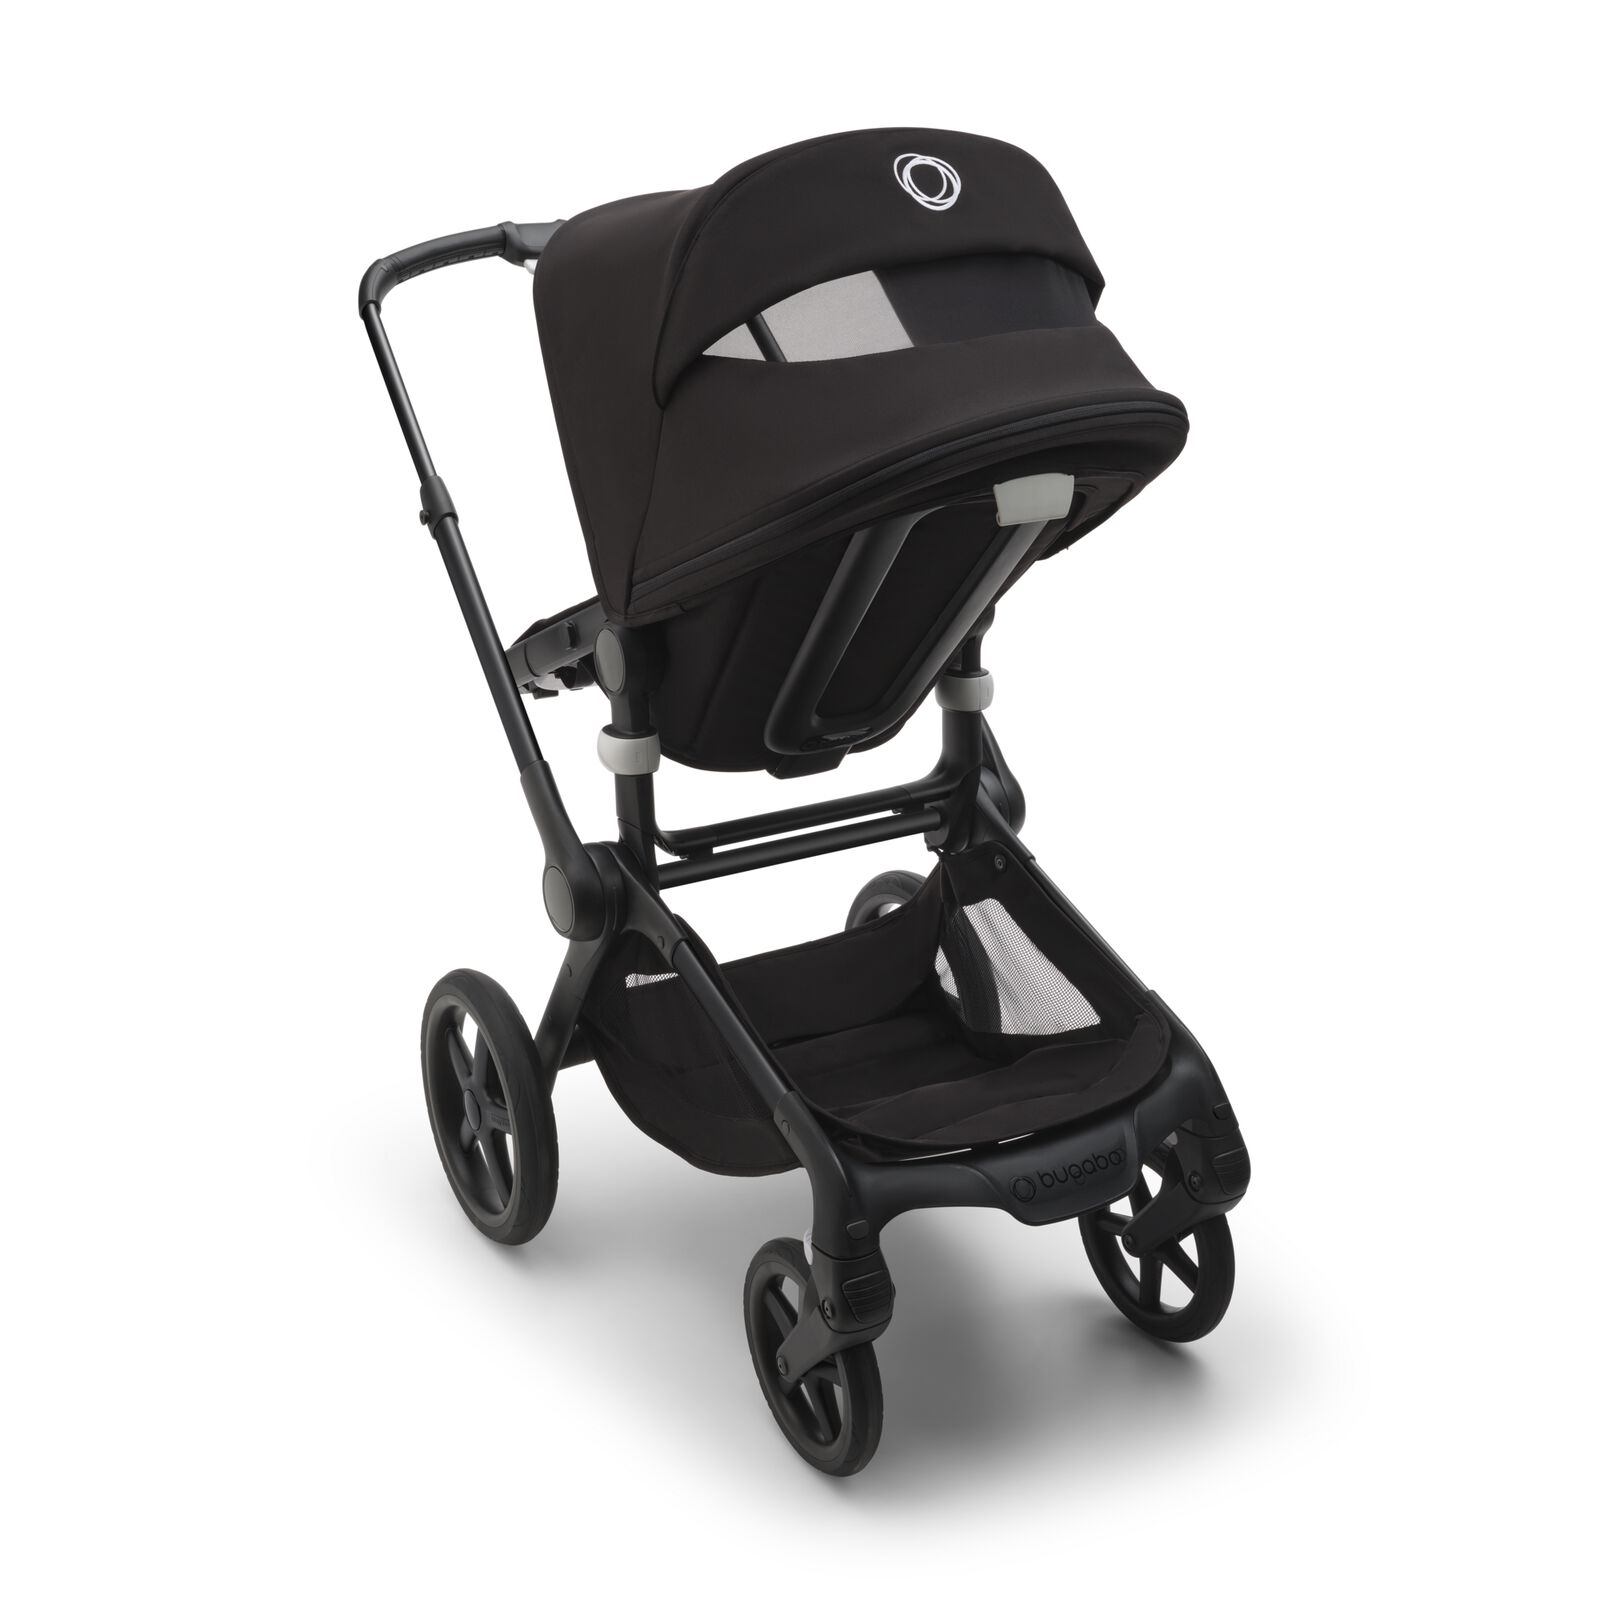 Back view of the Bugaboo Fox 5 stroller, with the sun canopy's peekaboo panel visible.